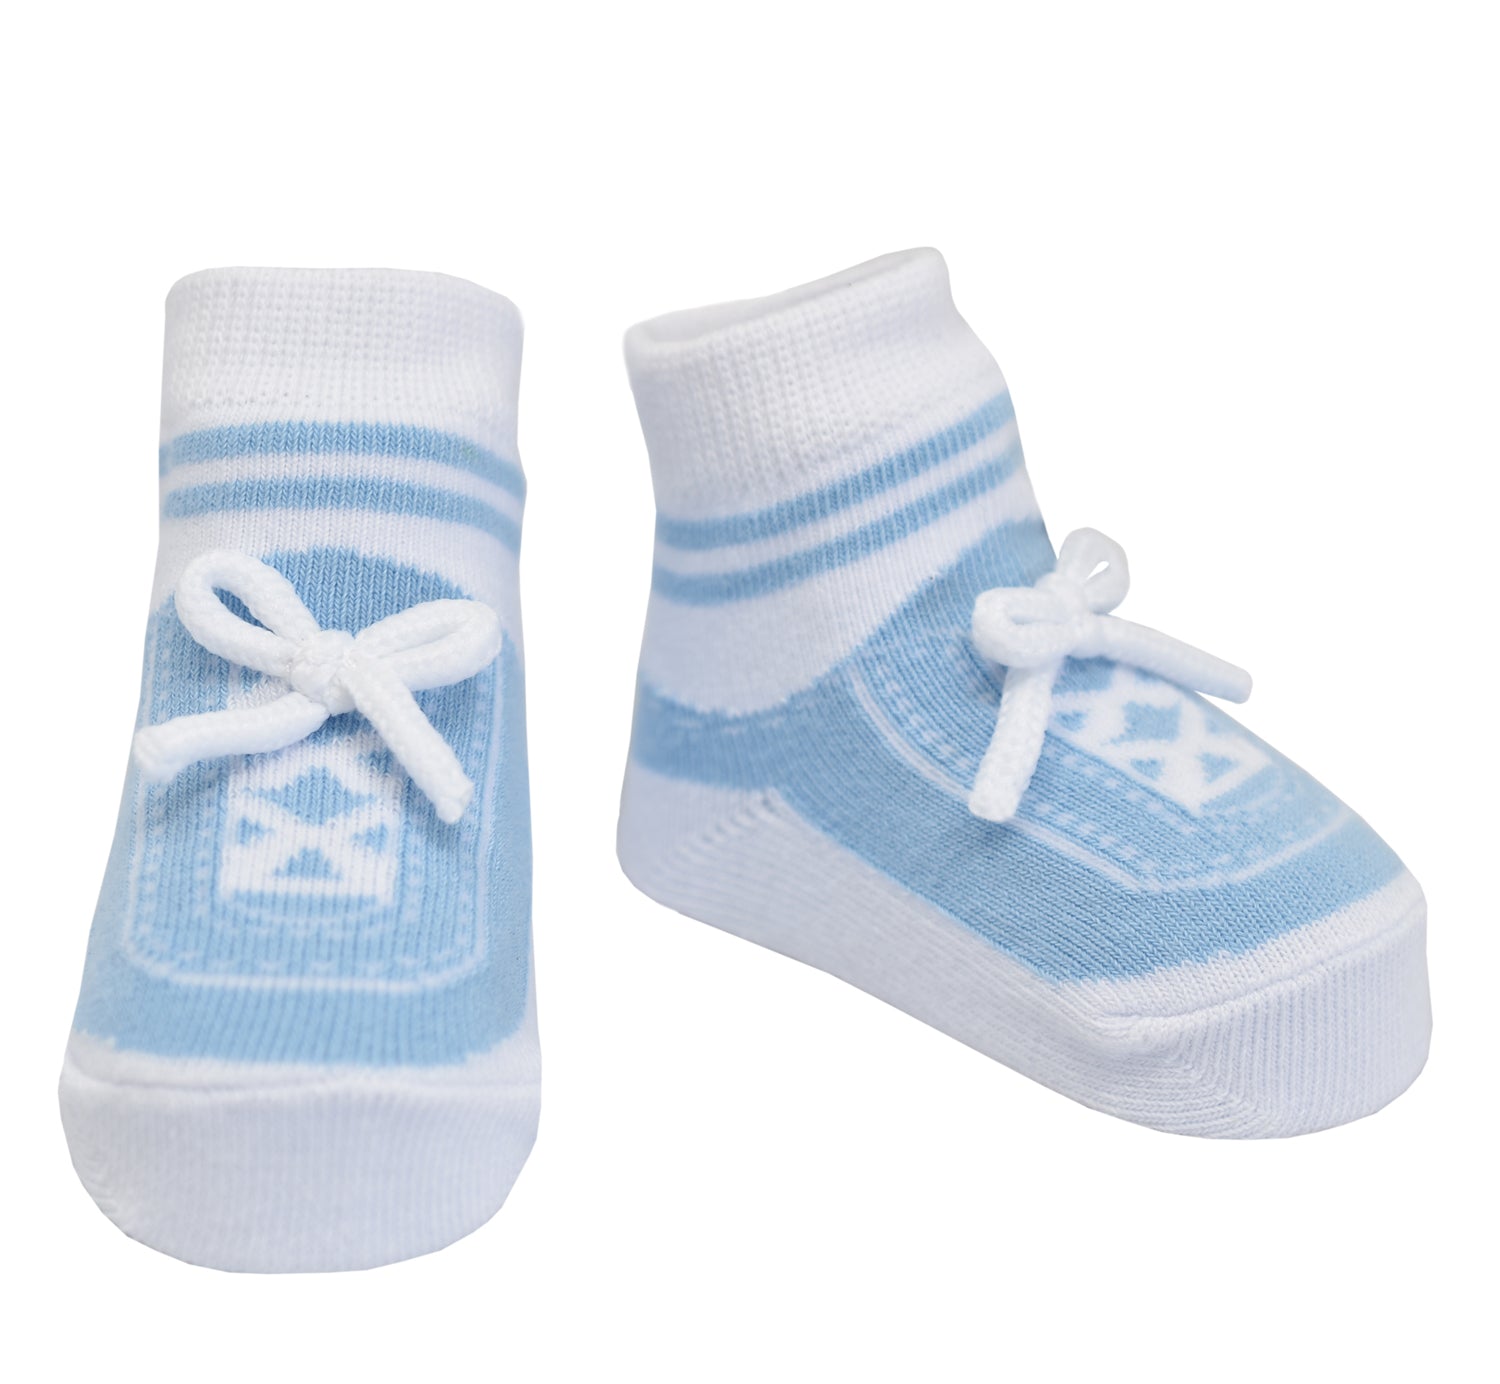 SNEAKERS - shoe-design socks. With faux-lace details and anti-slip soles. 6  pairs. 0-12 months